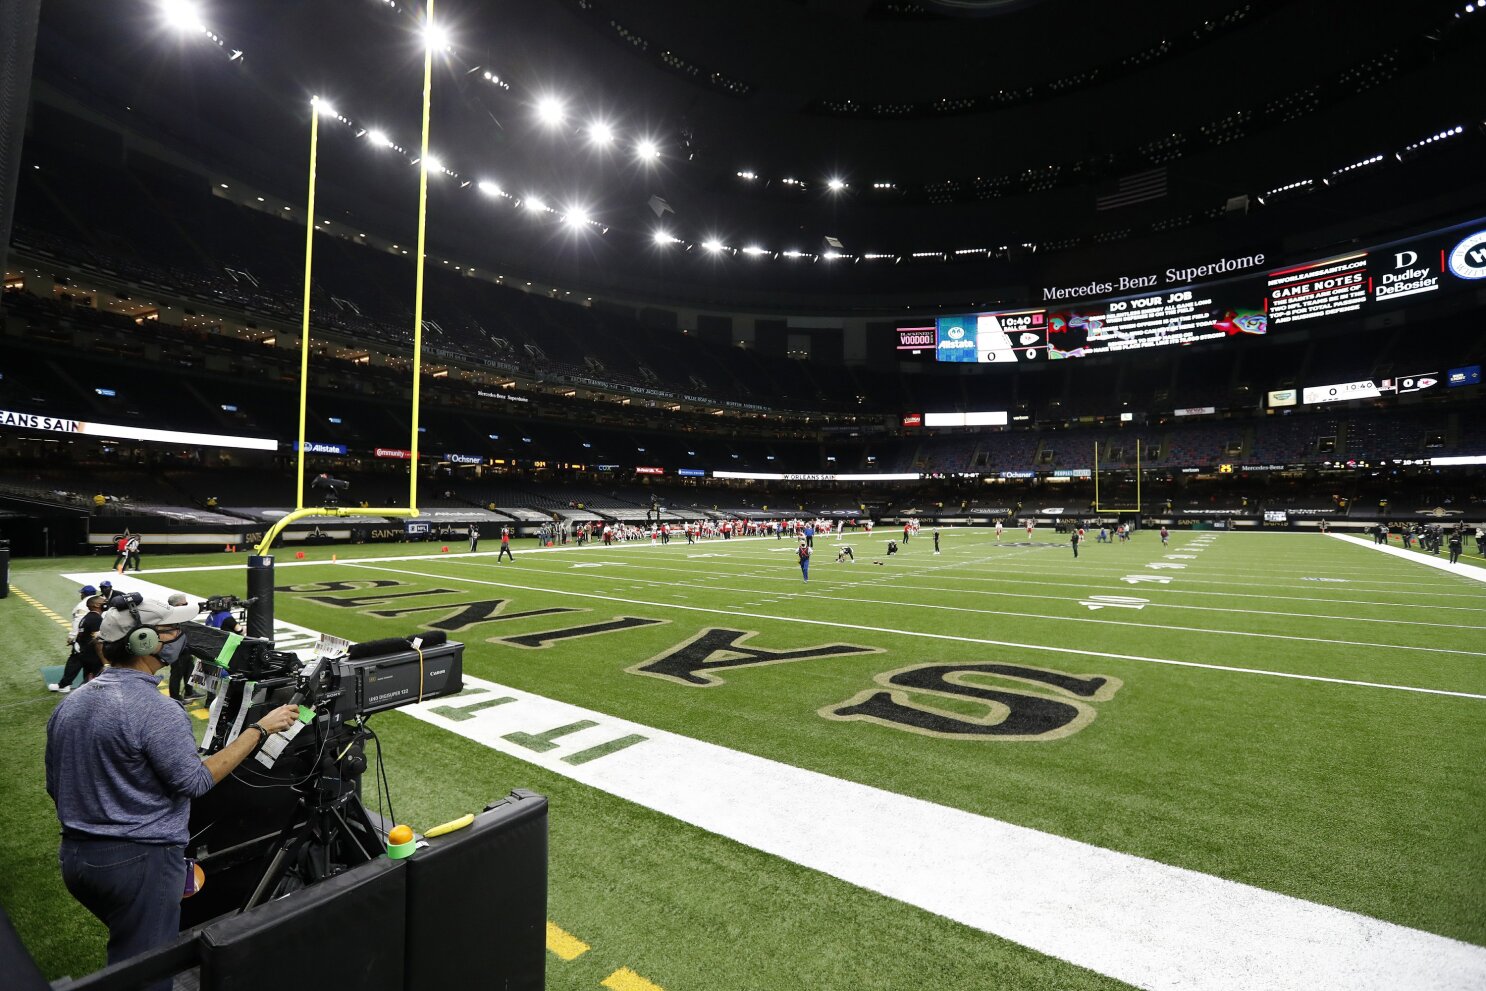 Virus pandemic slows renovations to Superdome in New Orleans